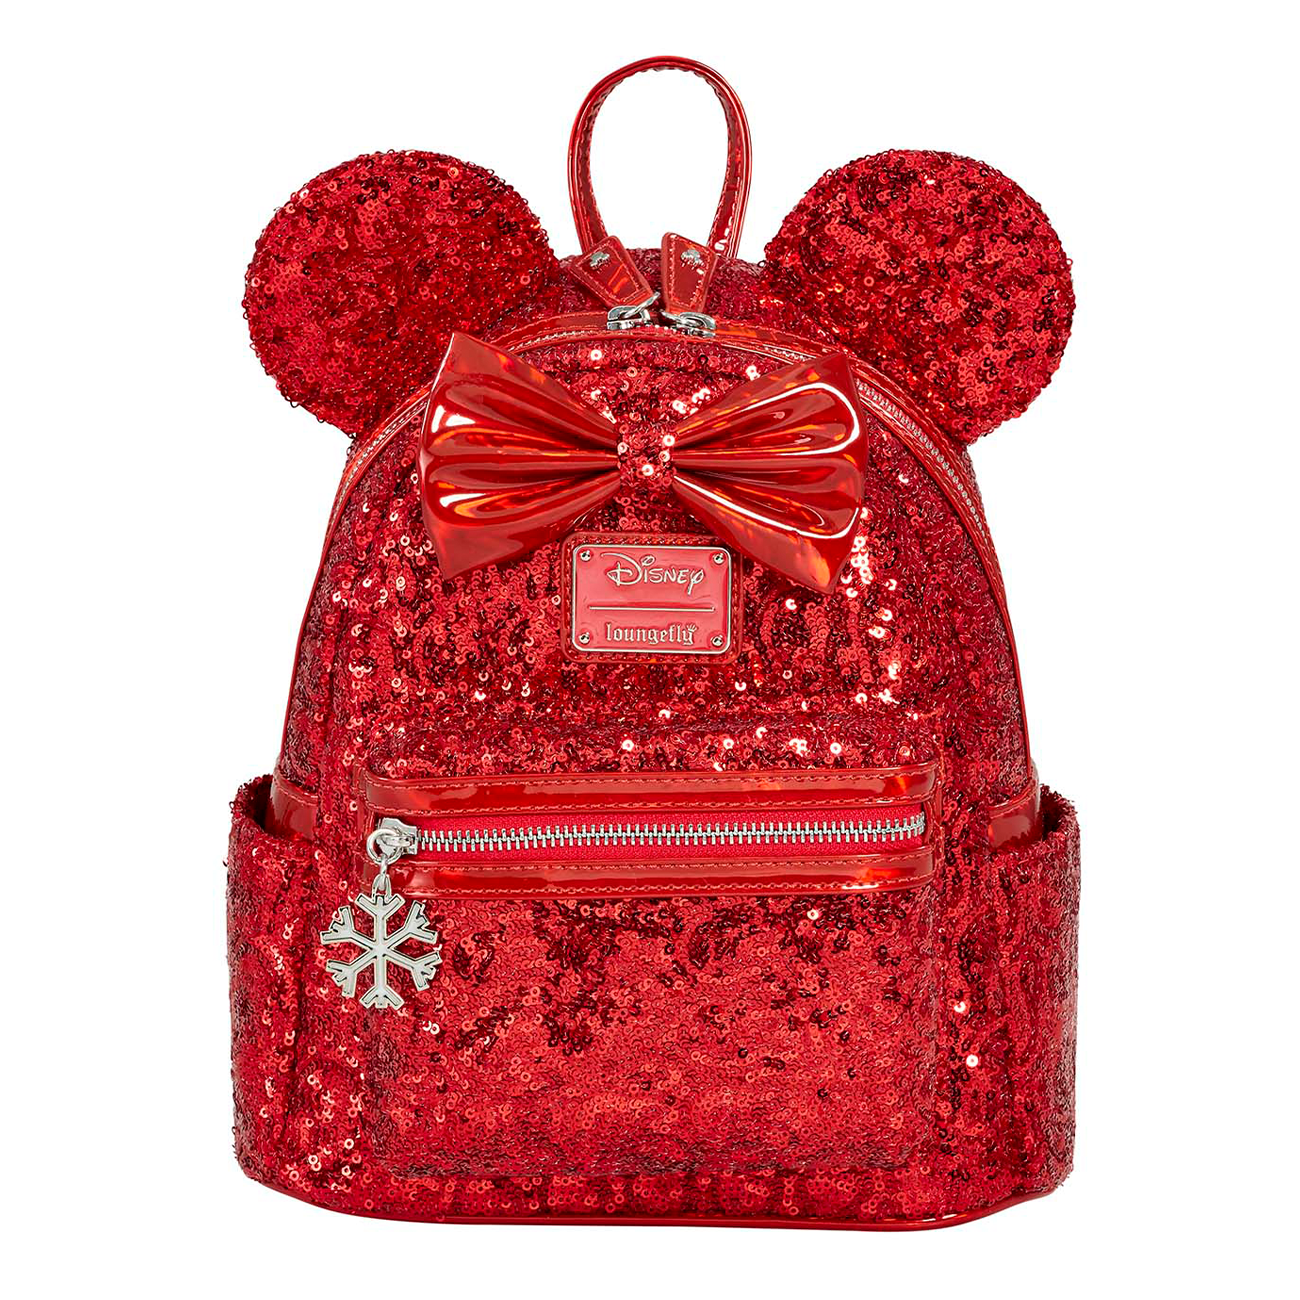 MINNIE MOUSE RED SEQUIN MINI BACKPACK